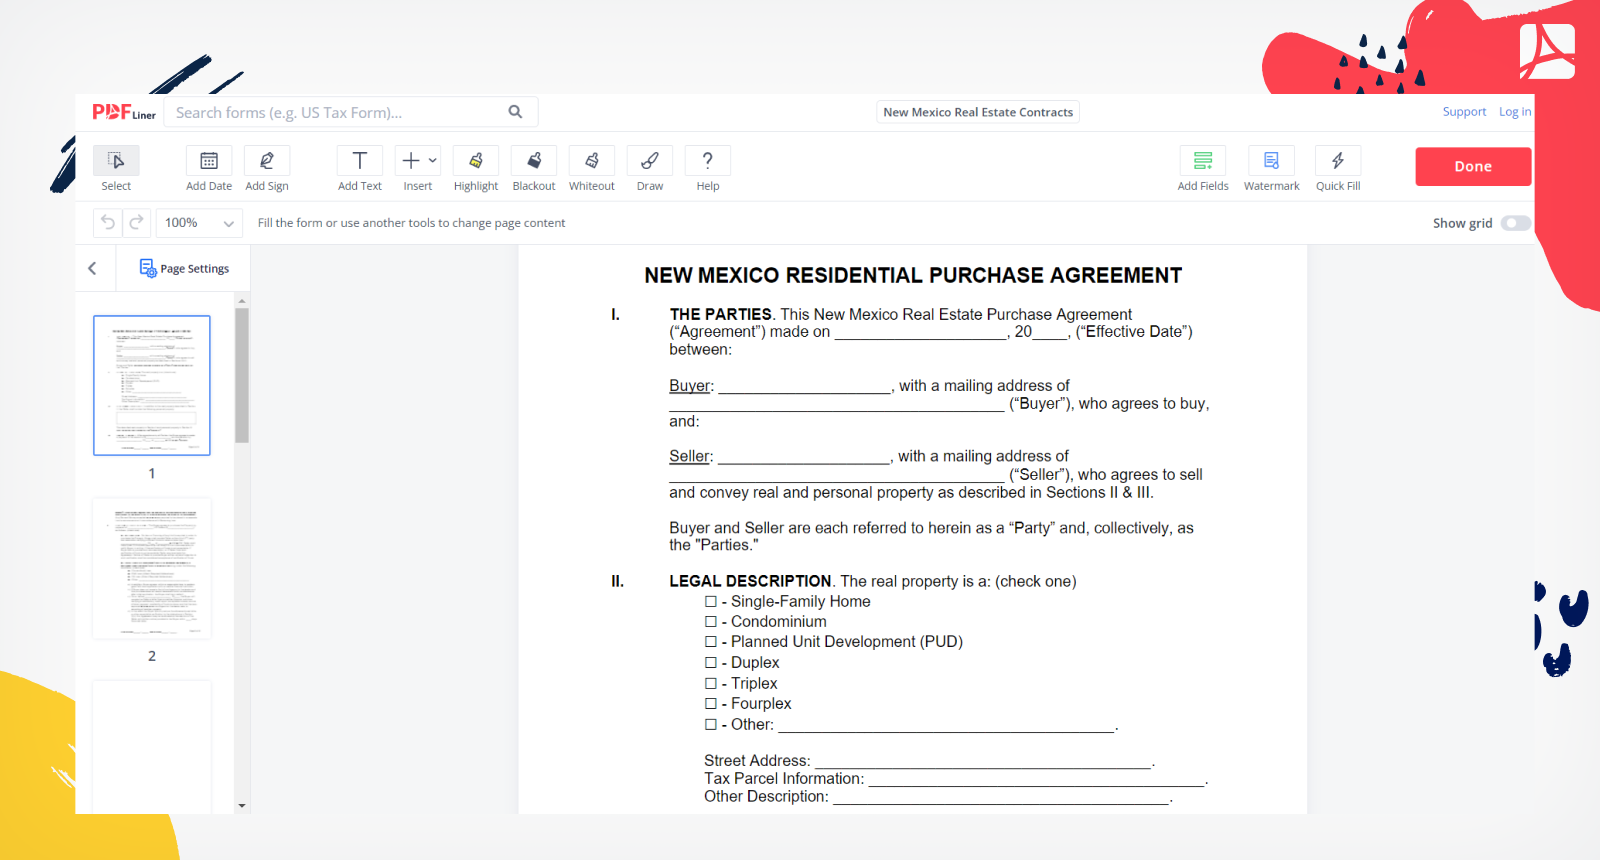 New Mexico Real Estate Contracts Form Screenshot